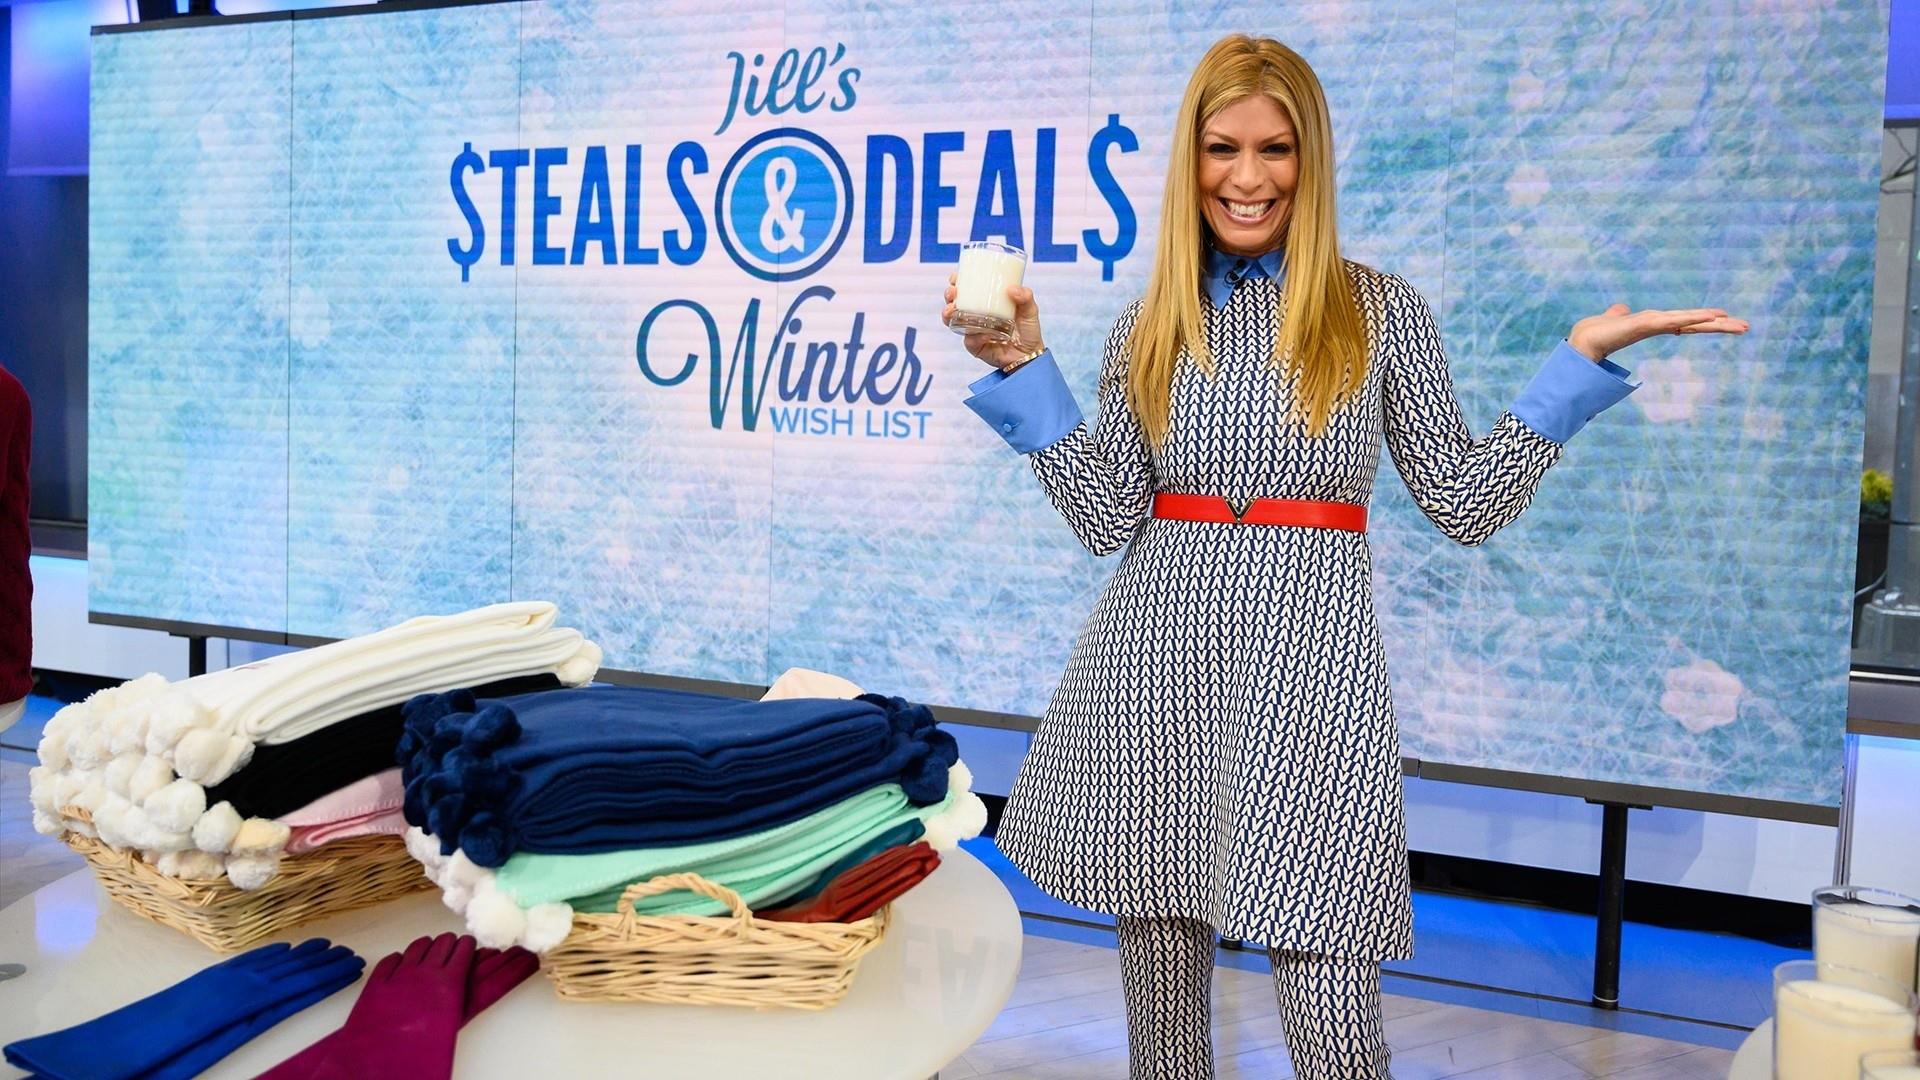 The Today Show: You Landed Jill's Steals and Deals - Will Your